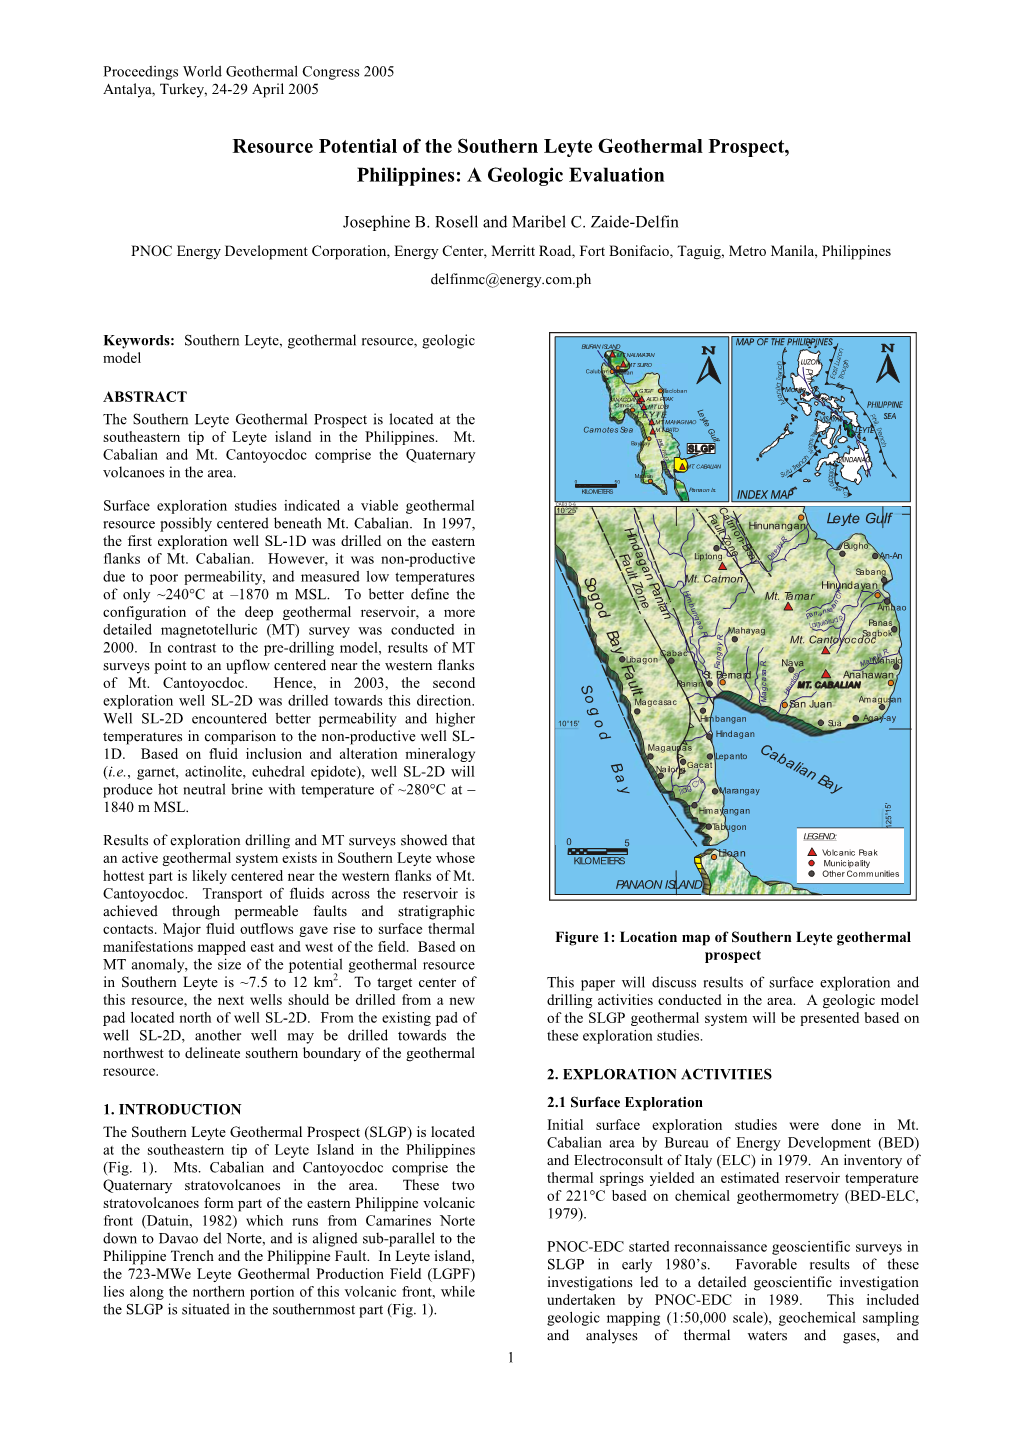 Resource Potential of the Southern Leyte Geothermal Prospect, Philippines: a Geologic Evaluation